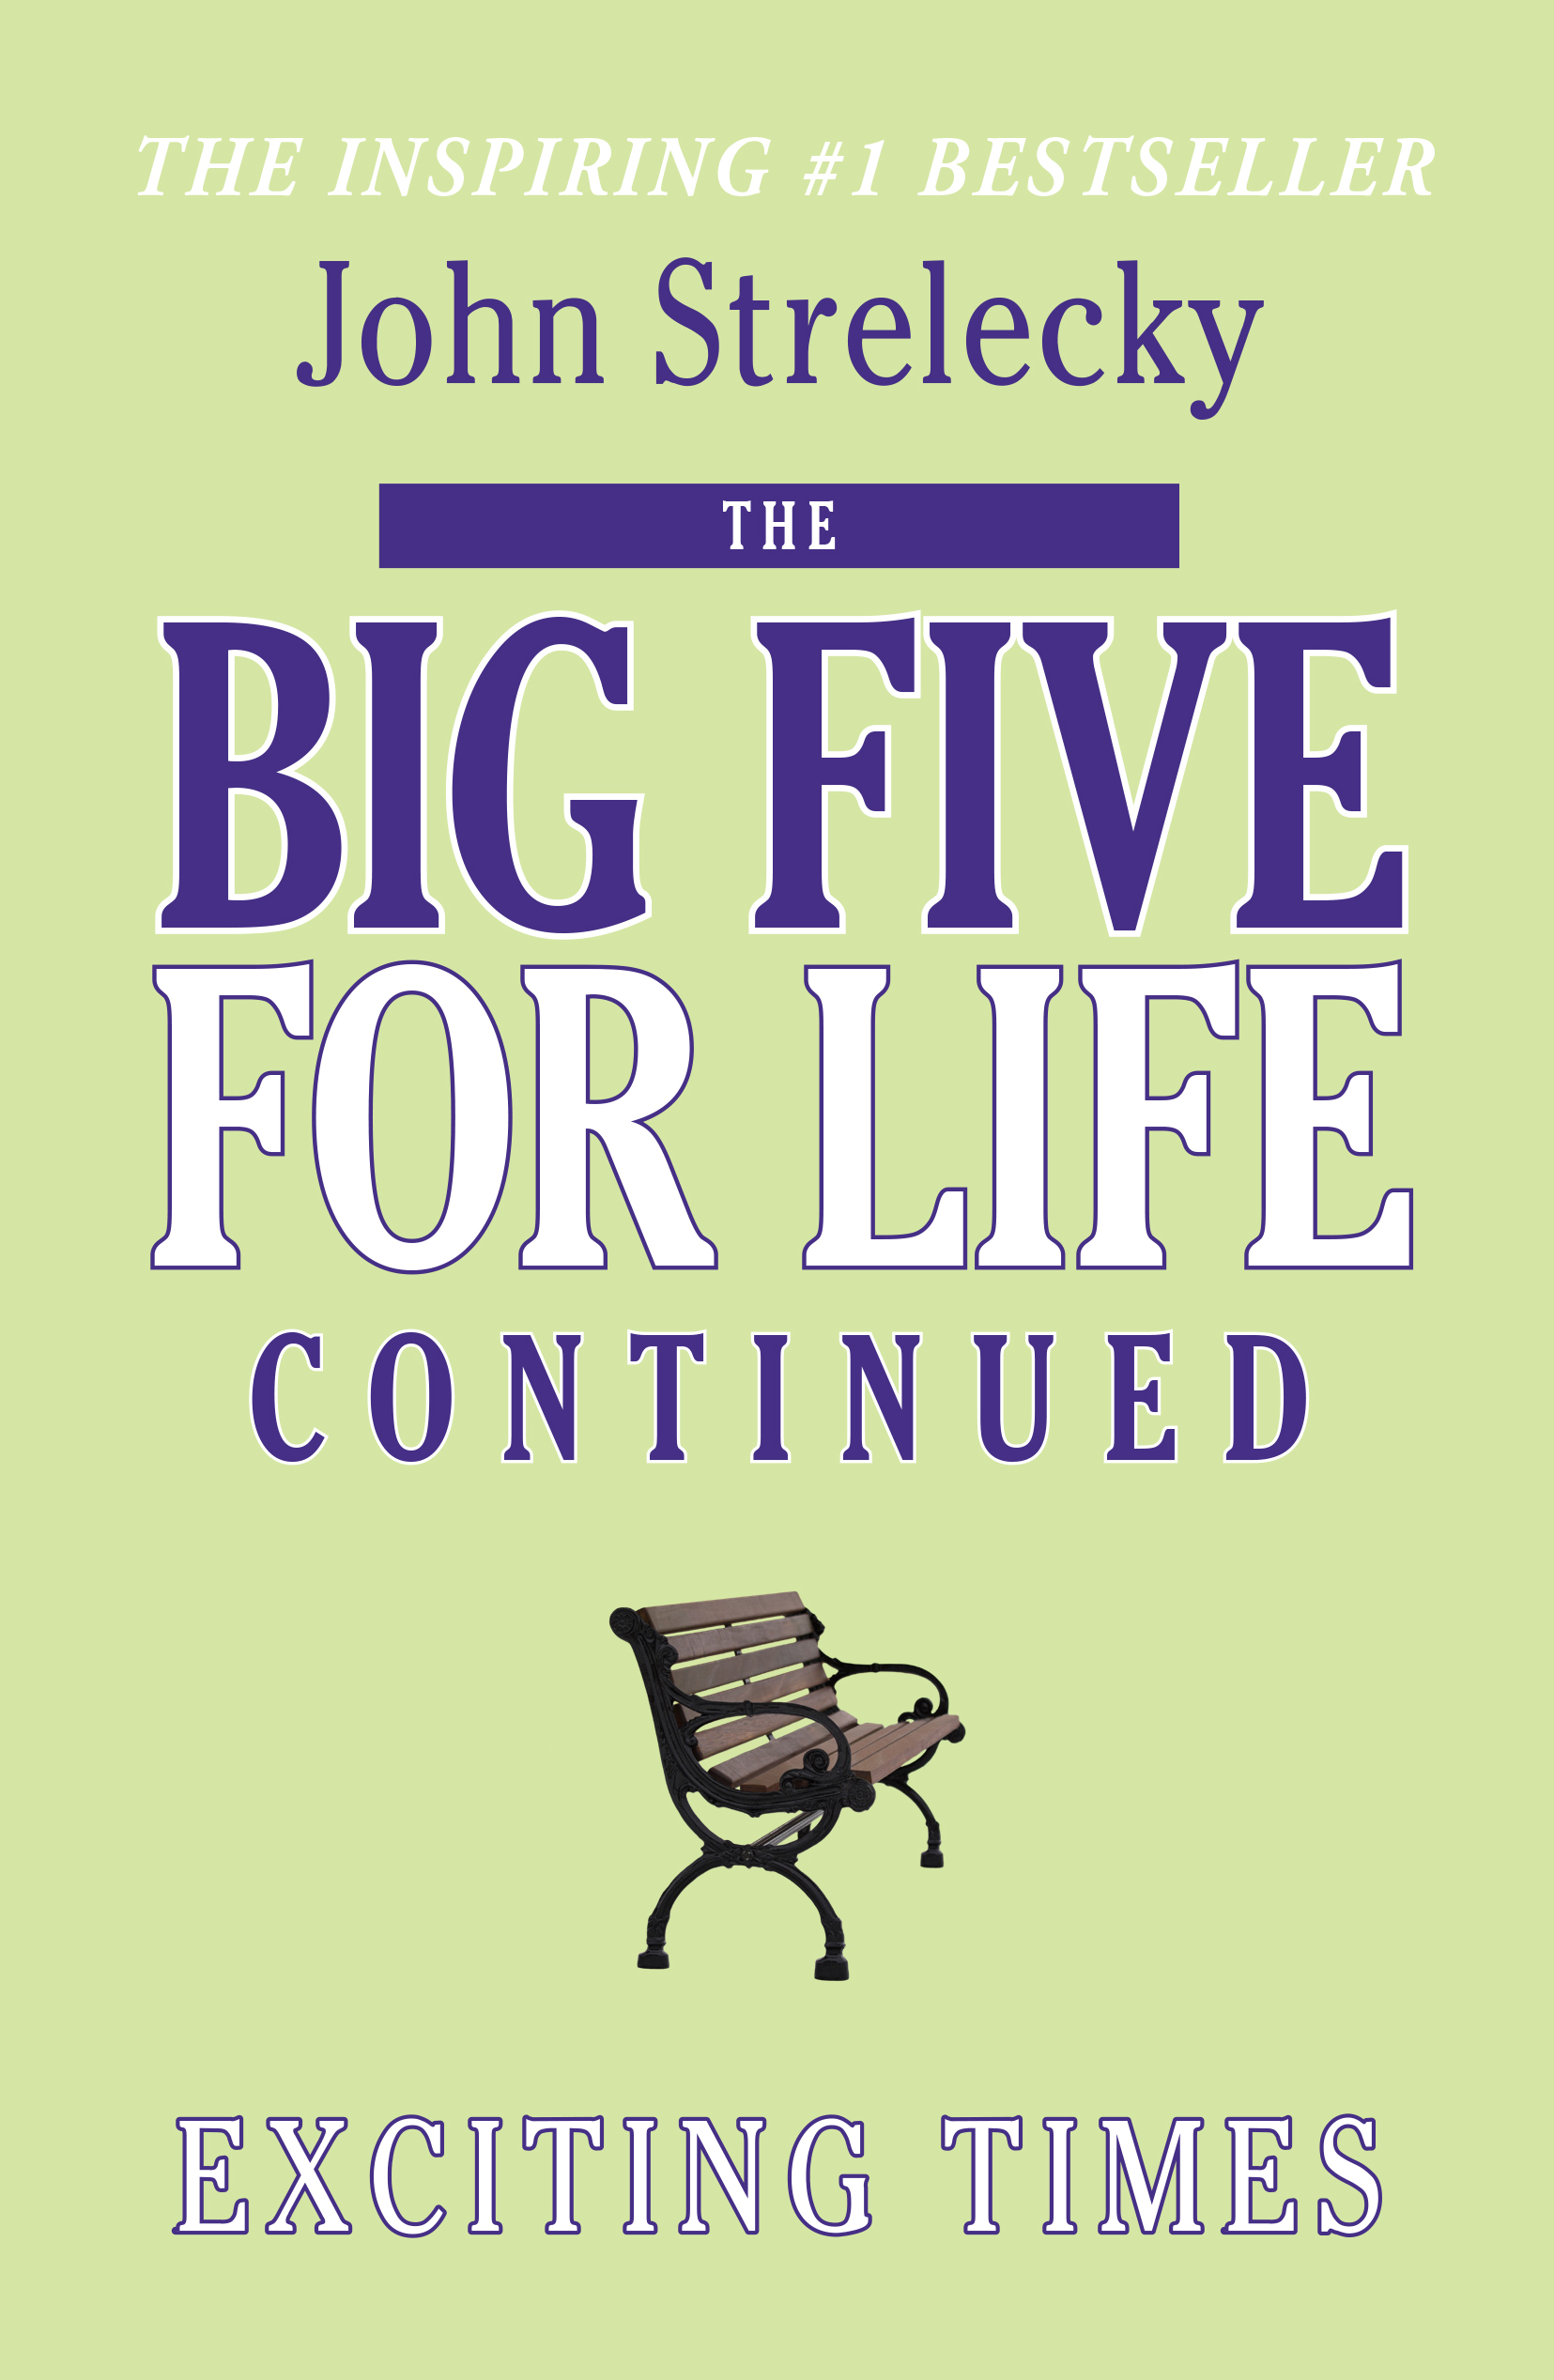 Big Five for life book